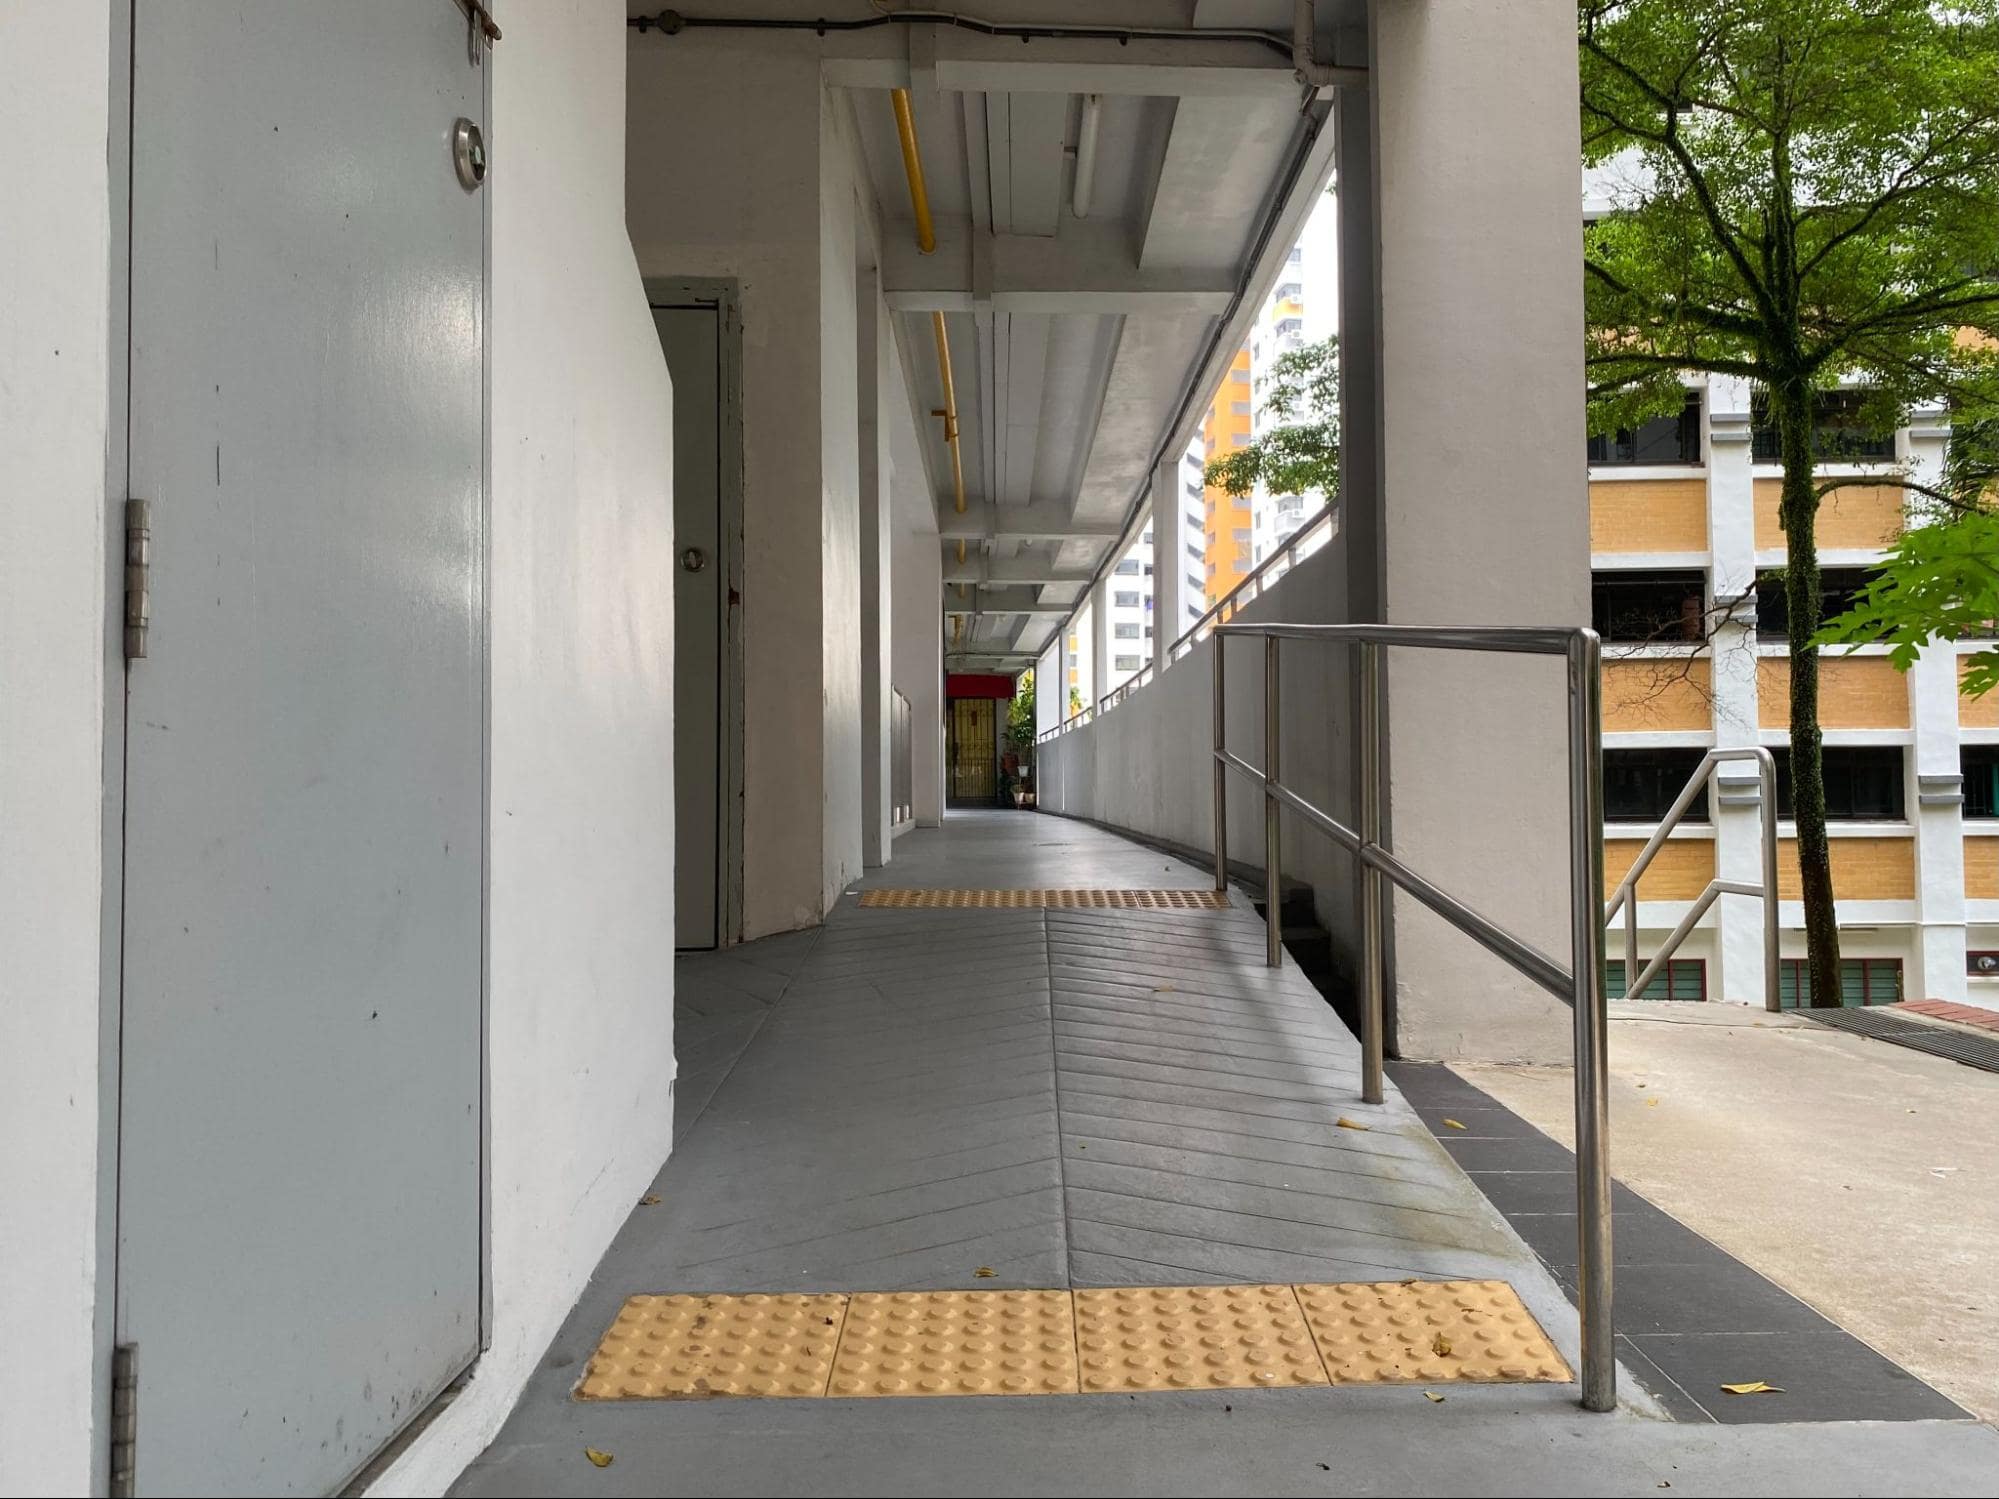 Accessibility ramps